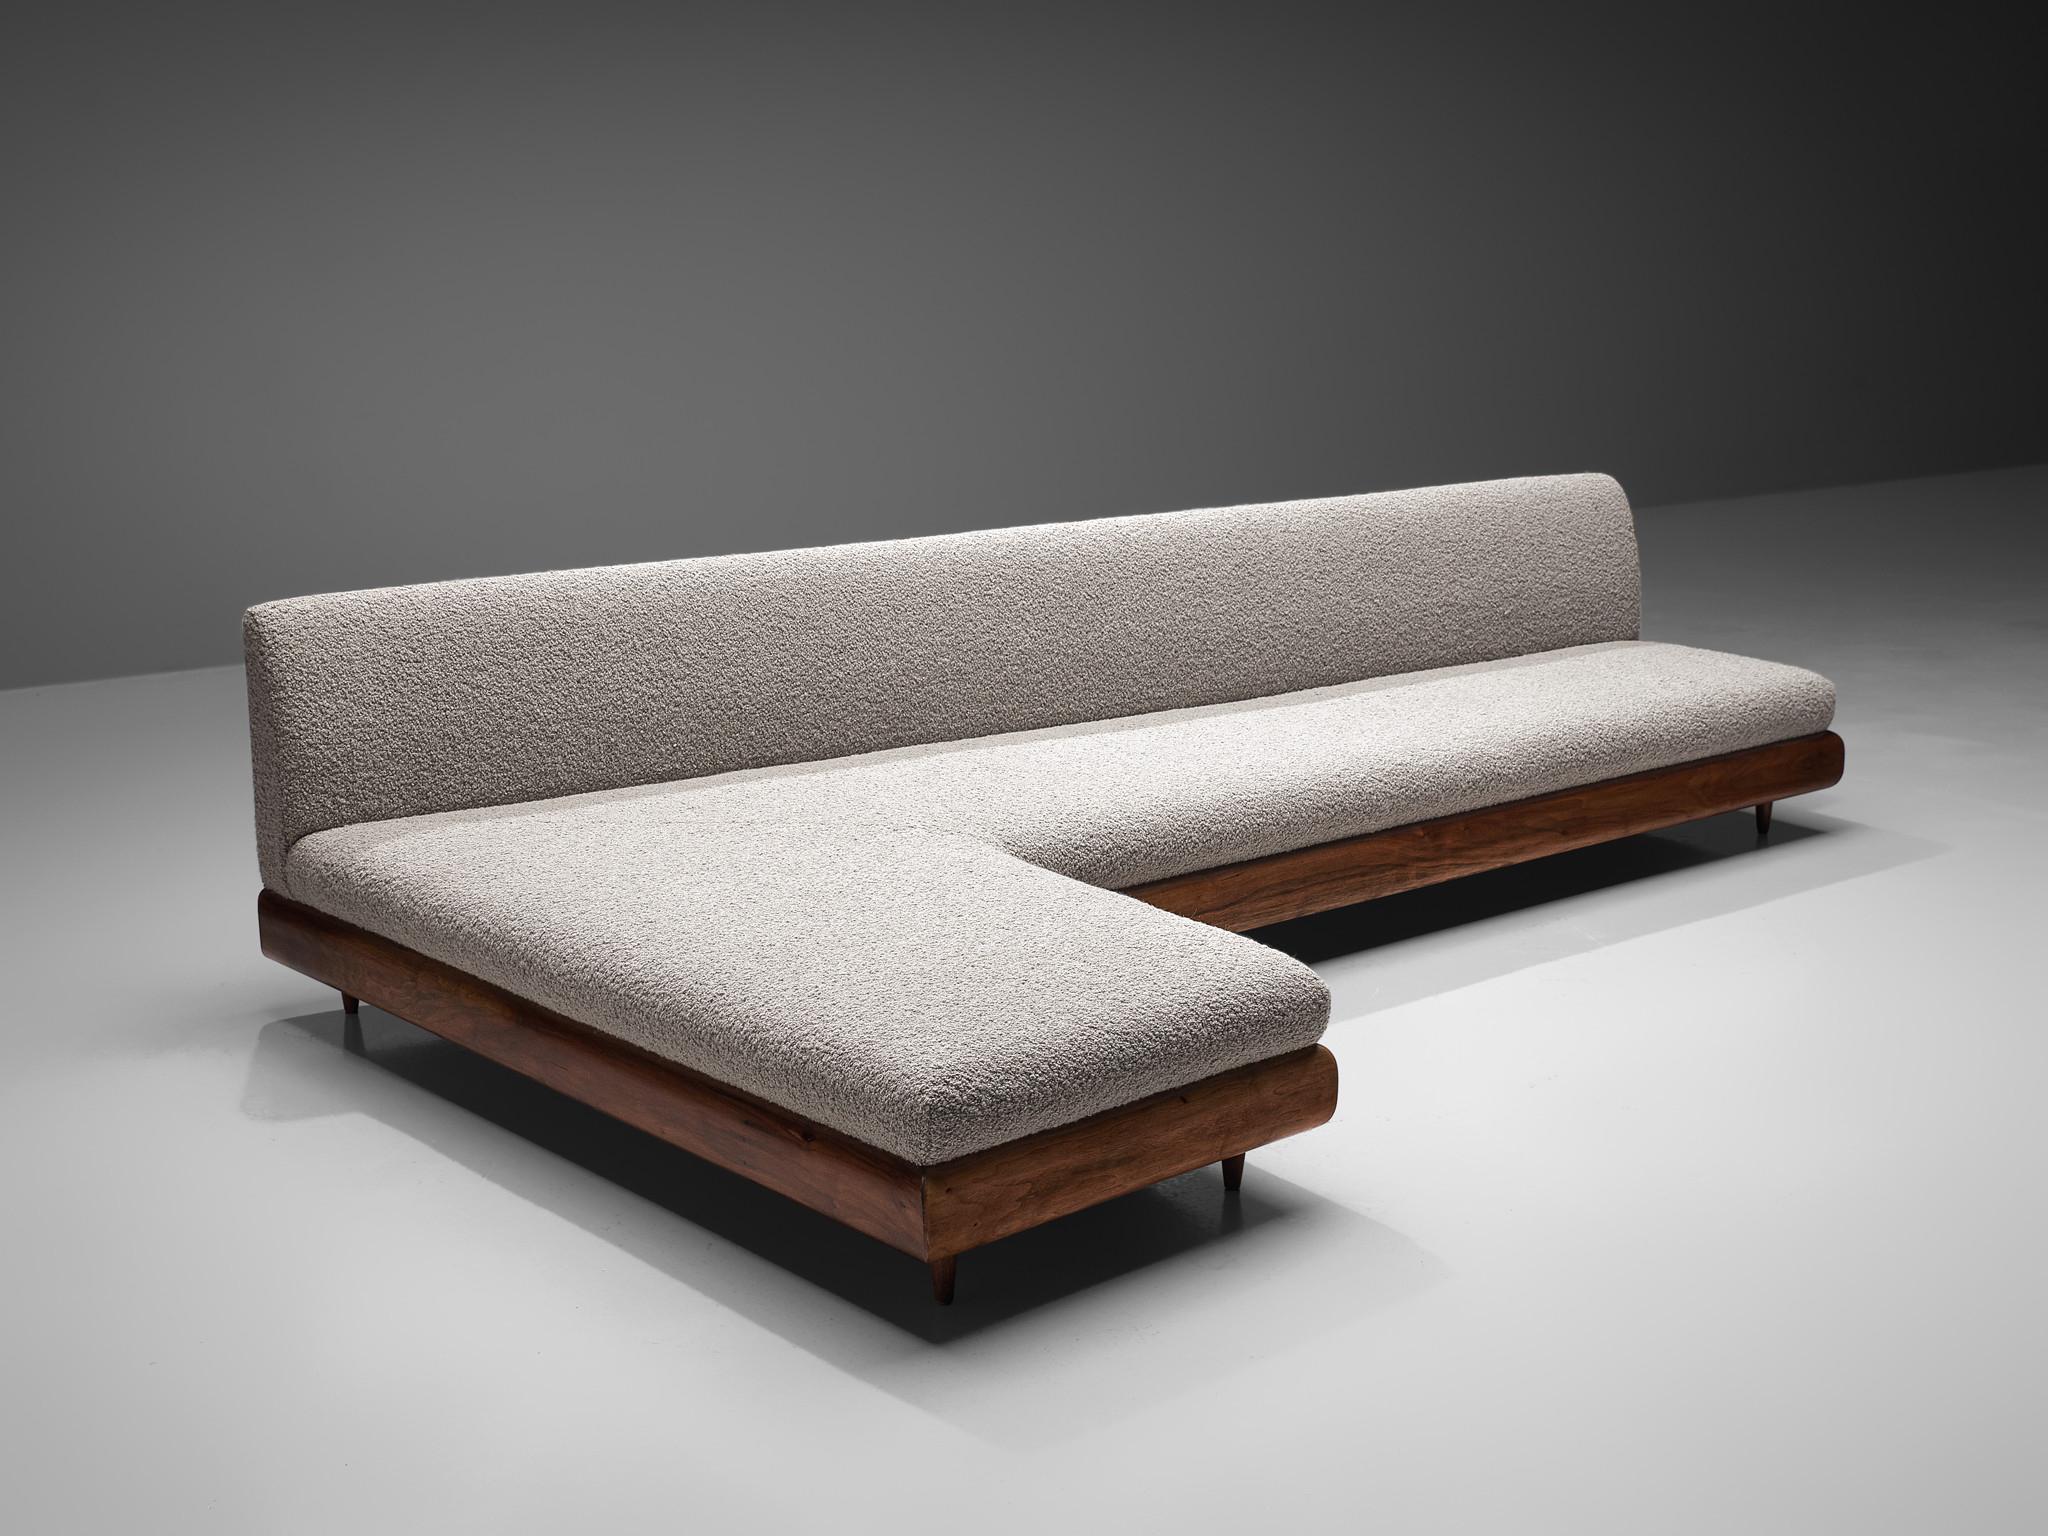 Adrian Pearsall for Craft Associates, 'Boomerang' sofa, model '1600-S', wool, walnut, United States, 1960s

This boomerang sofa has a unique shape based on angular lines, creating a monumental and inviting look. The left-facing sofa is a great